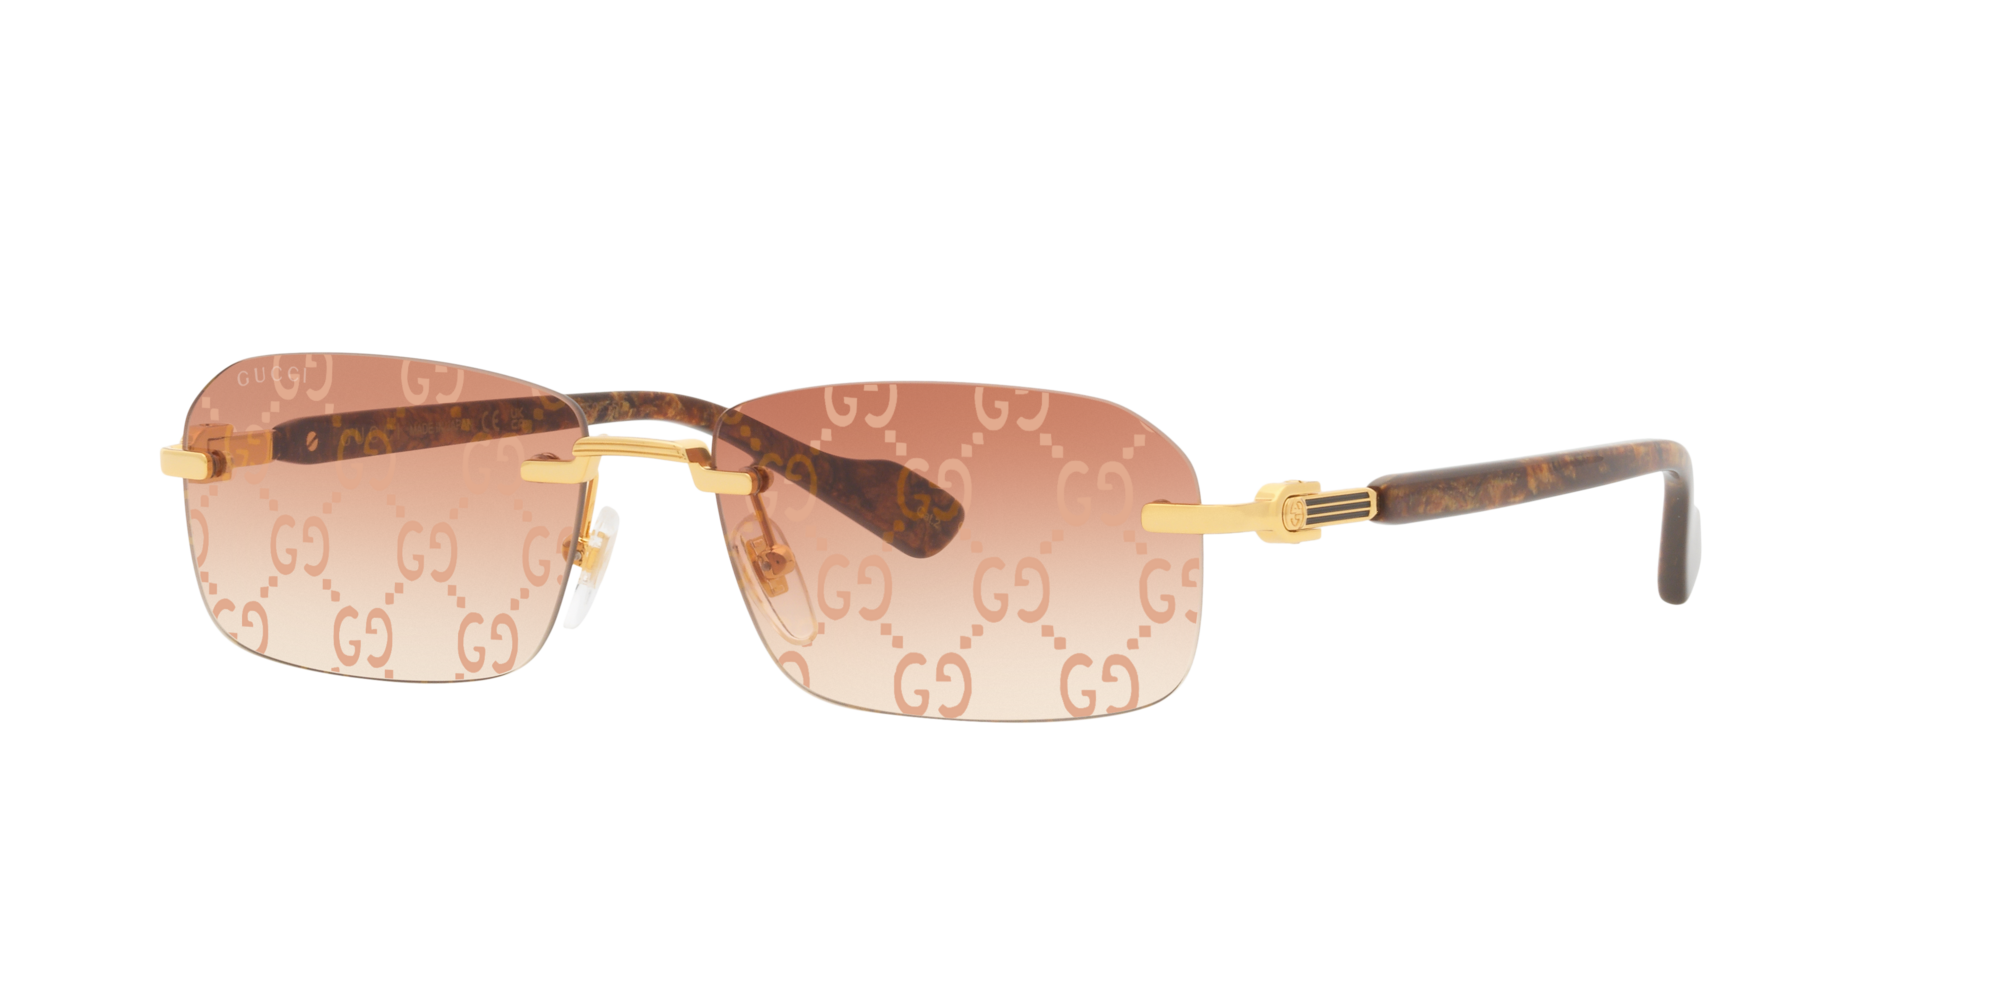 Gucci Glasses and Sunglasses for Women & Men – All Eyes On Me